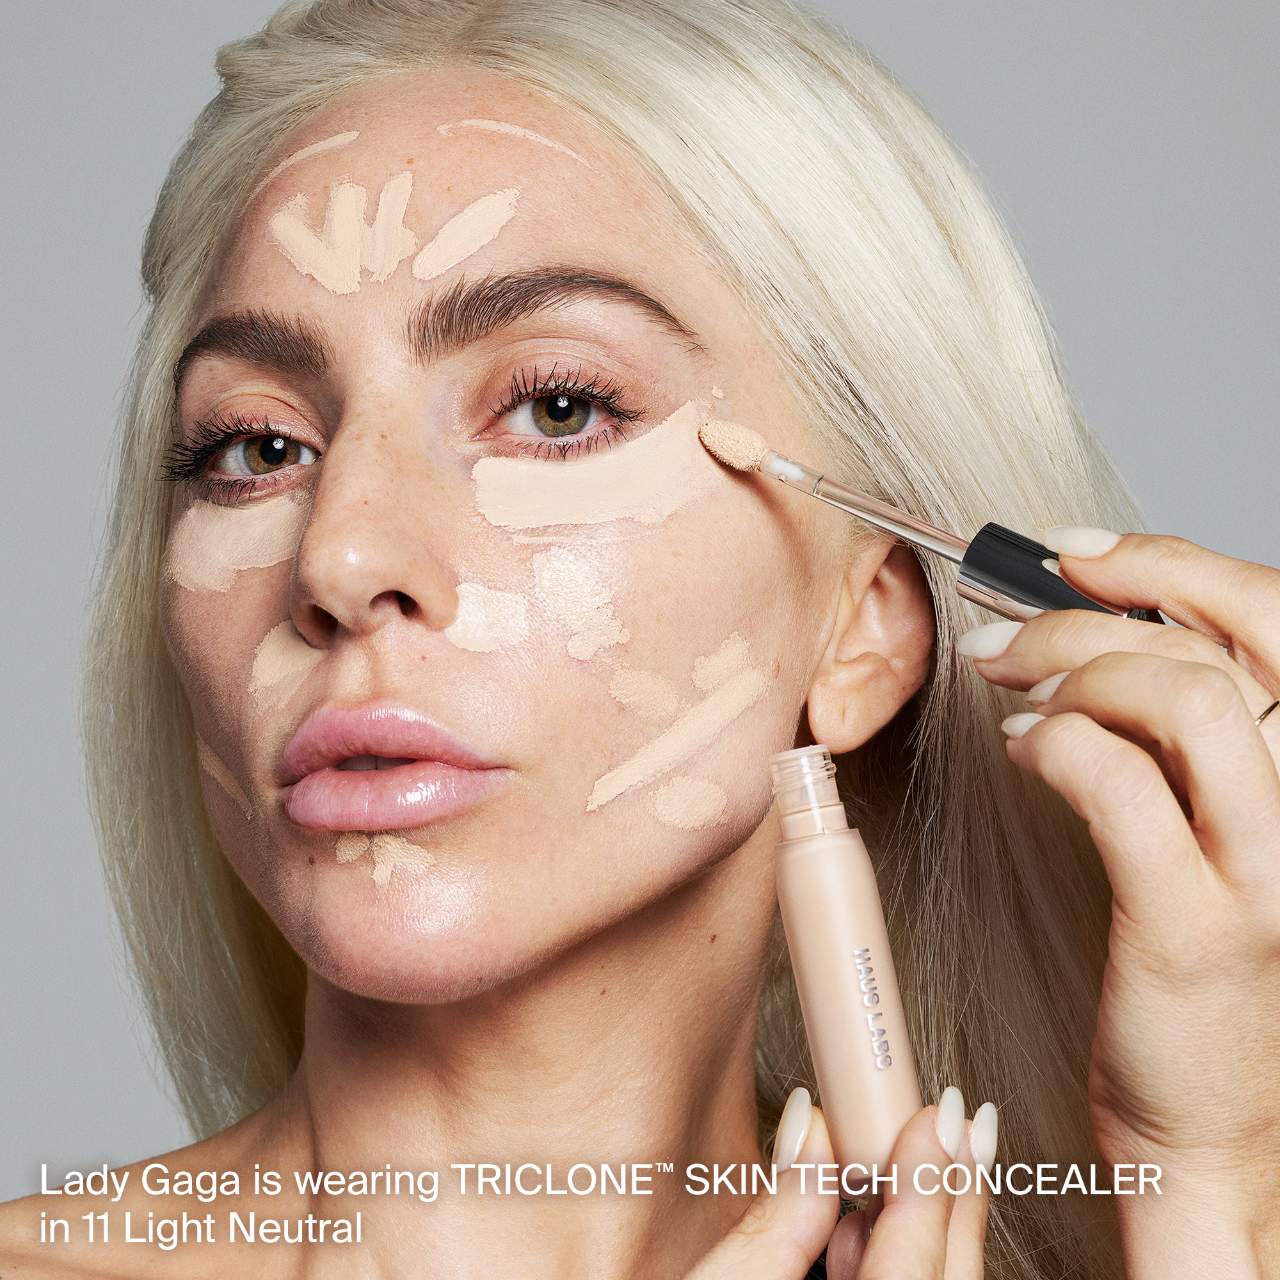 HAUS LABS BY LADY GAGA | Triclone Skin Tech Hydrating + De-puffing Concealer with Fermented Arnica | 22 Light Medium Peach